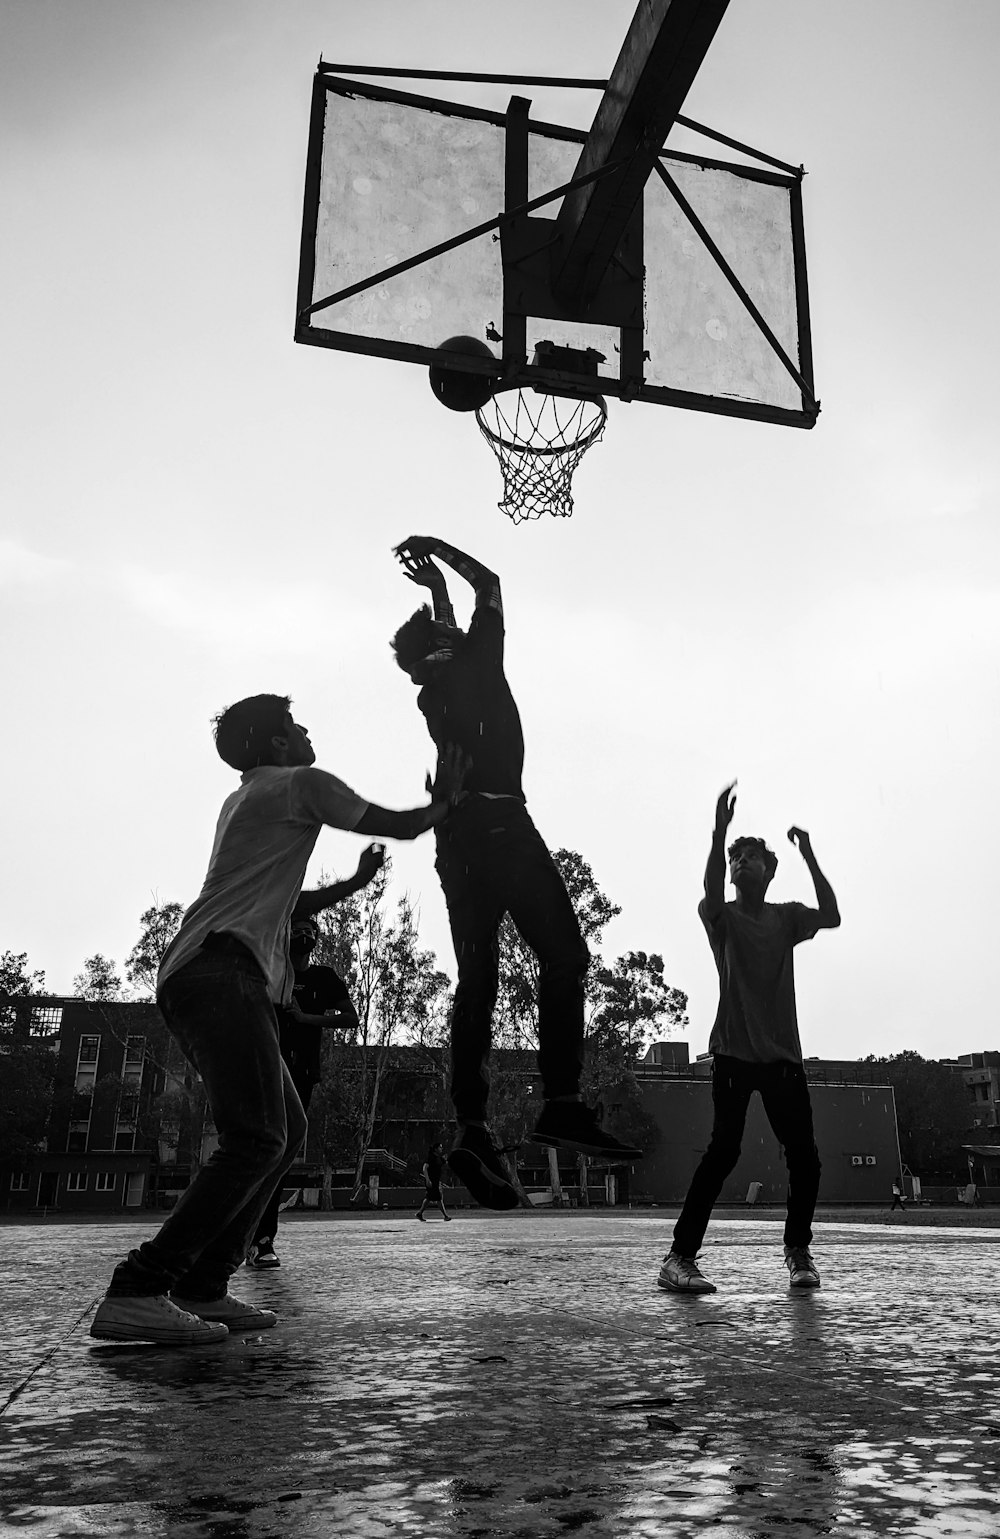 a group of young men playing a game of basketball